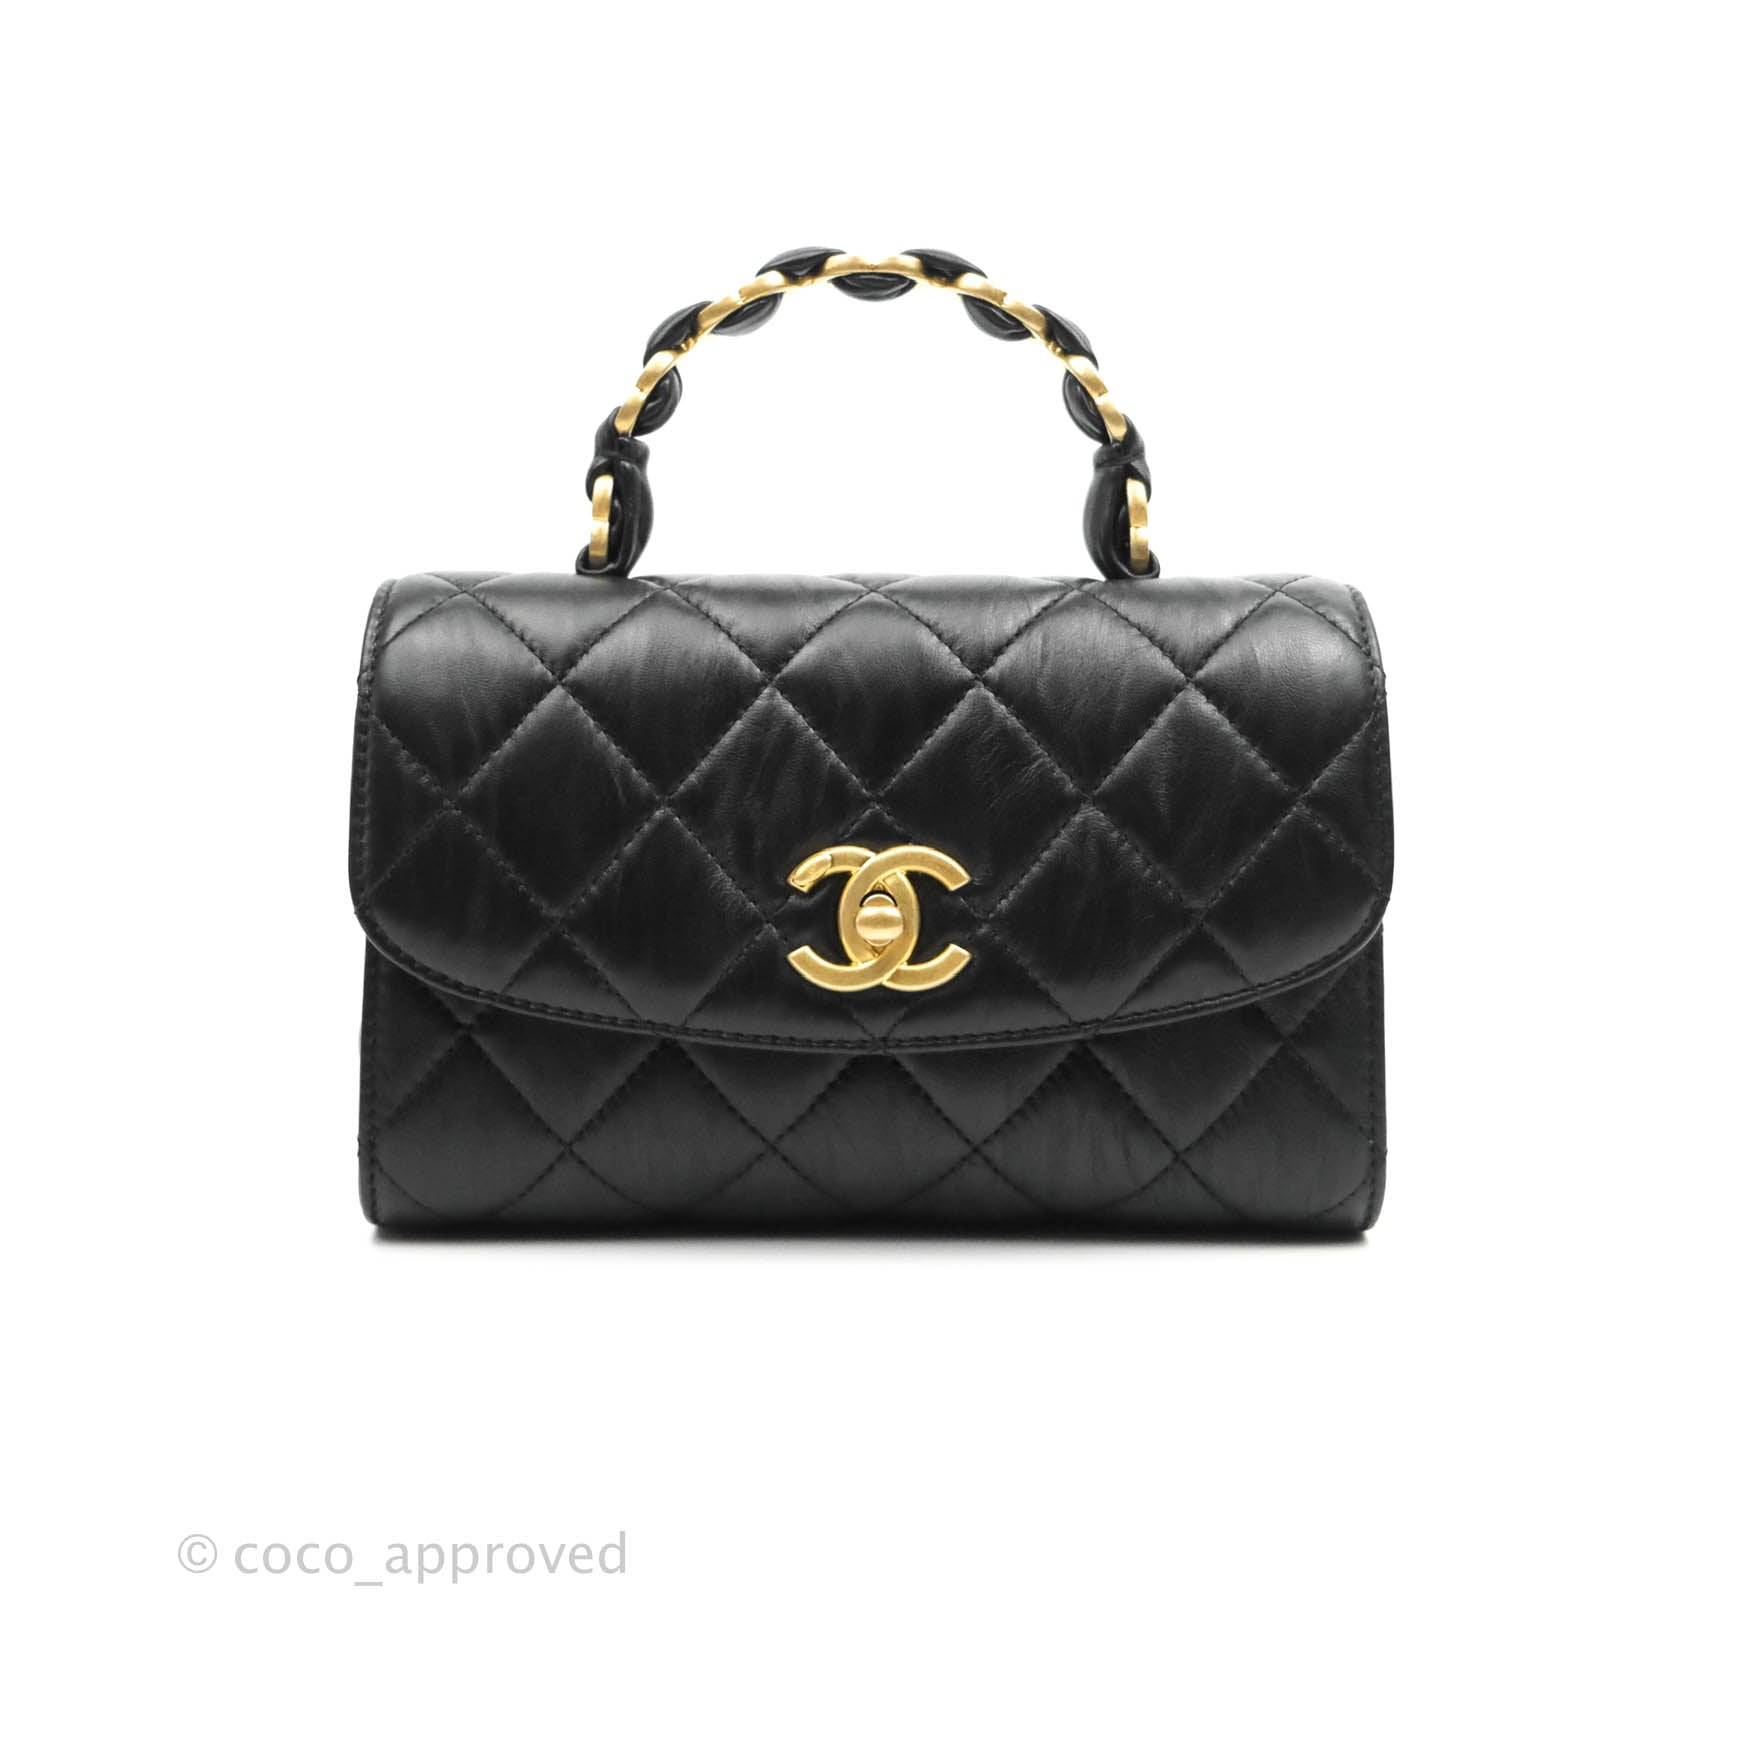 Chanel Mini Rectangular Flap with Top Handle Pink and Green Lambskin Light  Gold Hardware